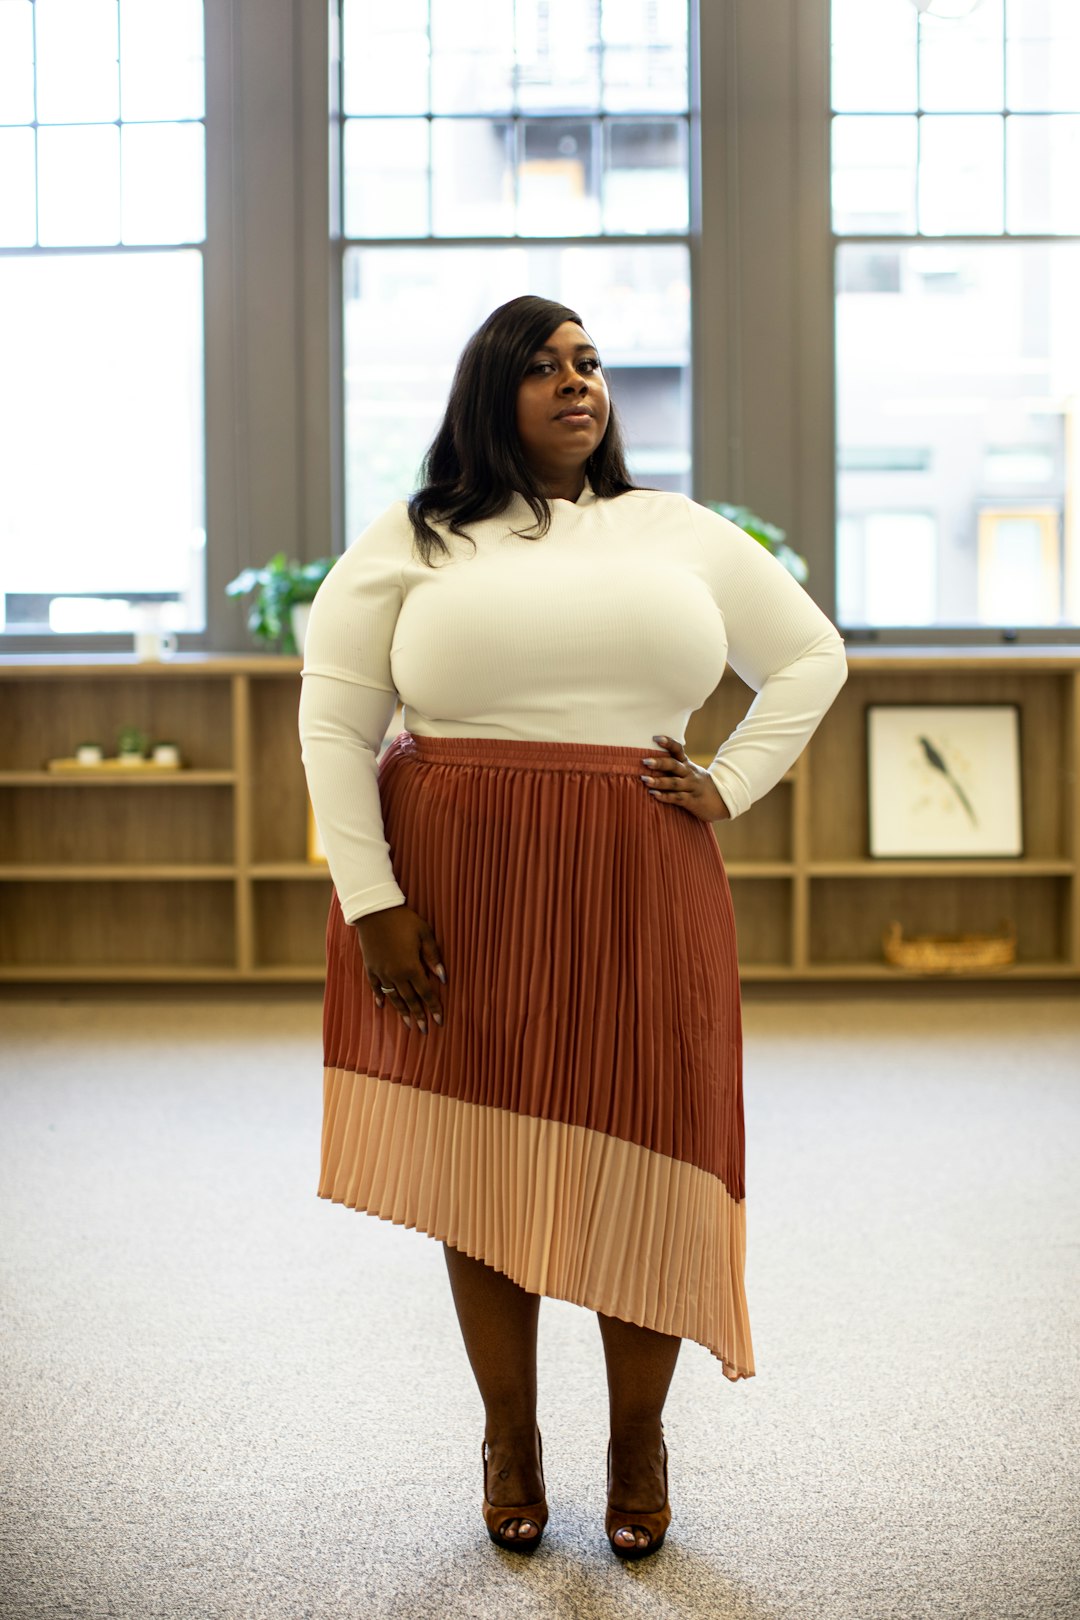 AllGo - An App For Plus Size People (@canweallgo)